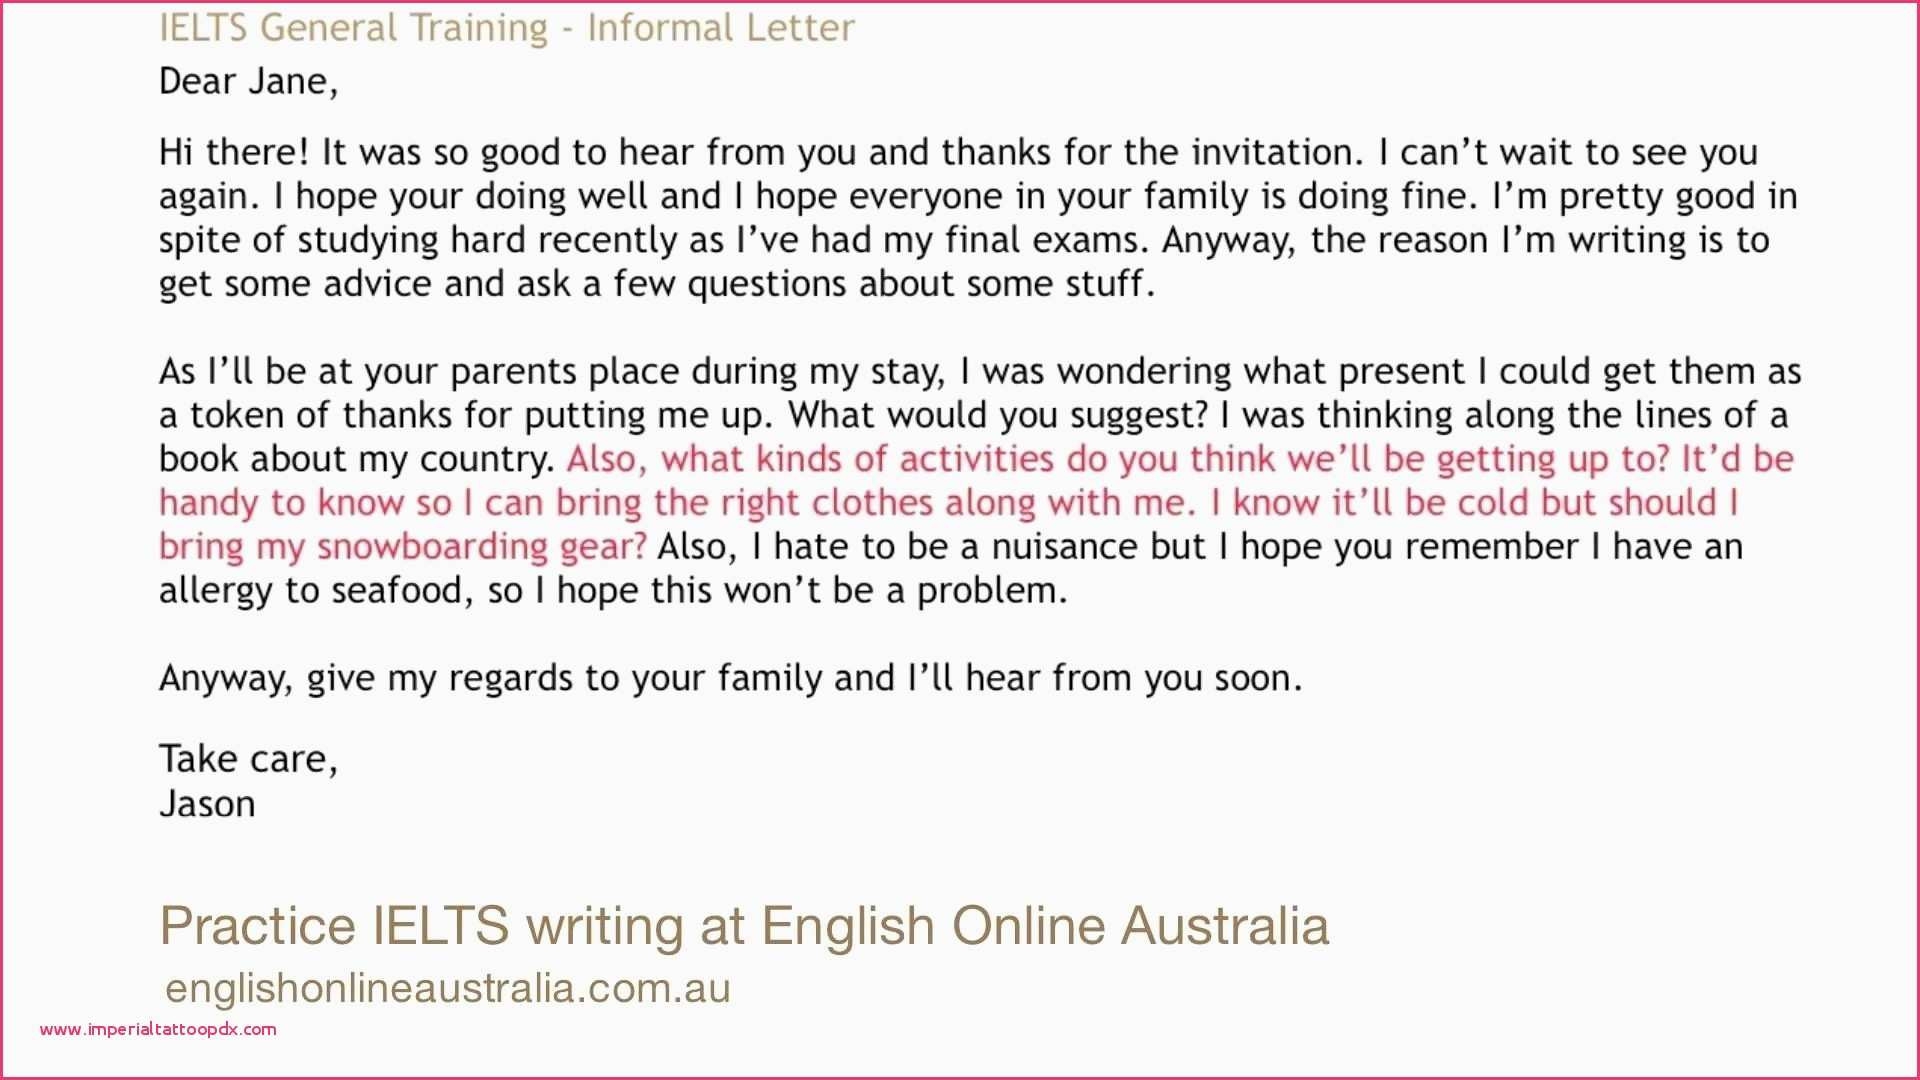 Do you wrote this letter. Informal Letter writing. IELTS informal Letter. IELTS General writing task 1. IELTS writing Letter.